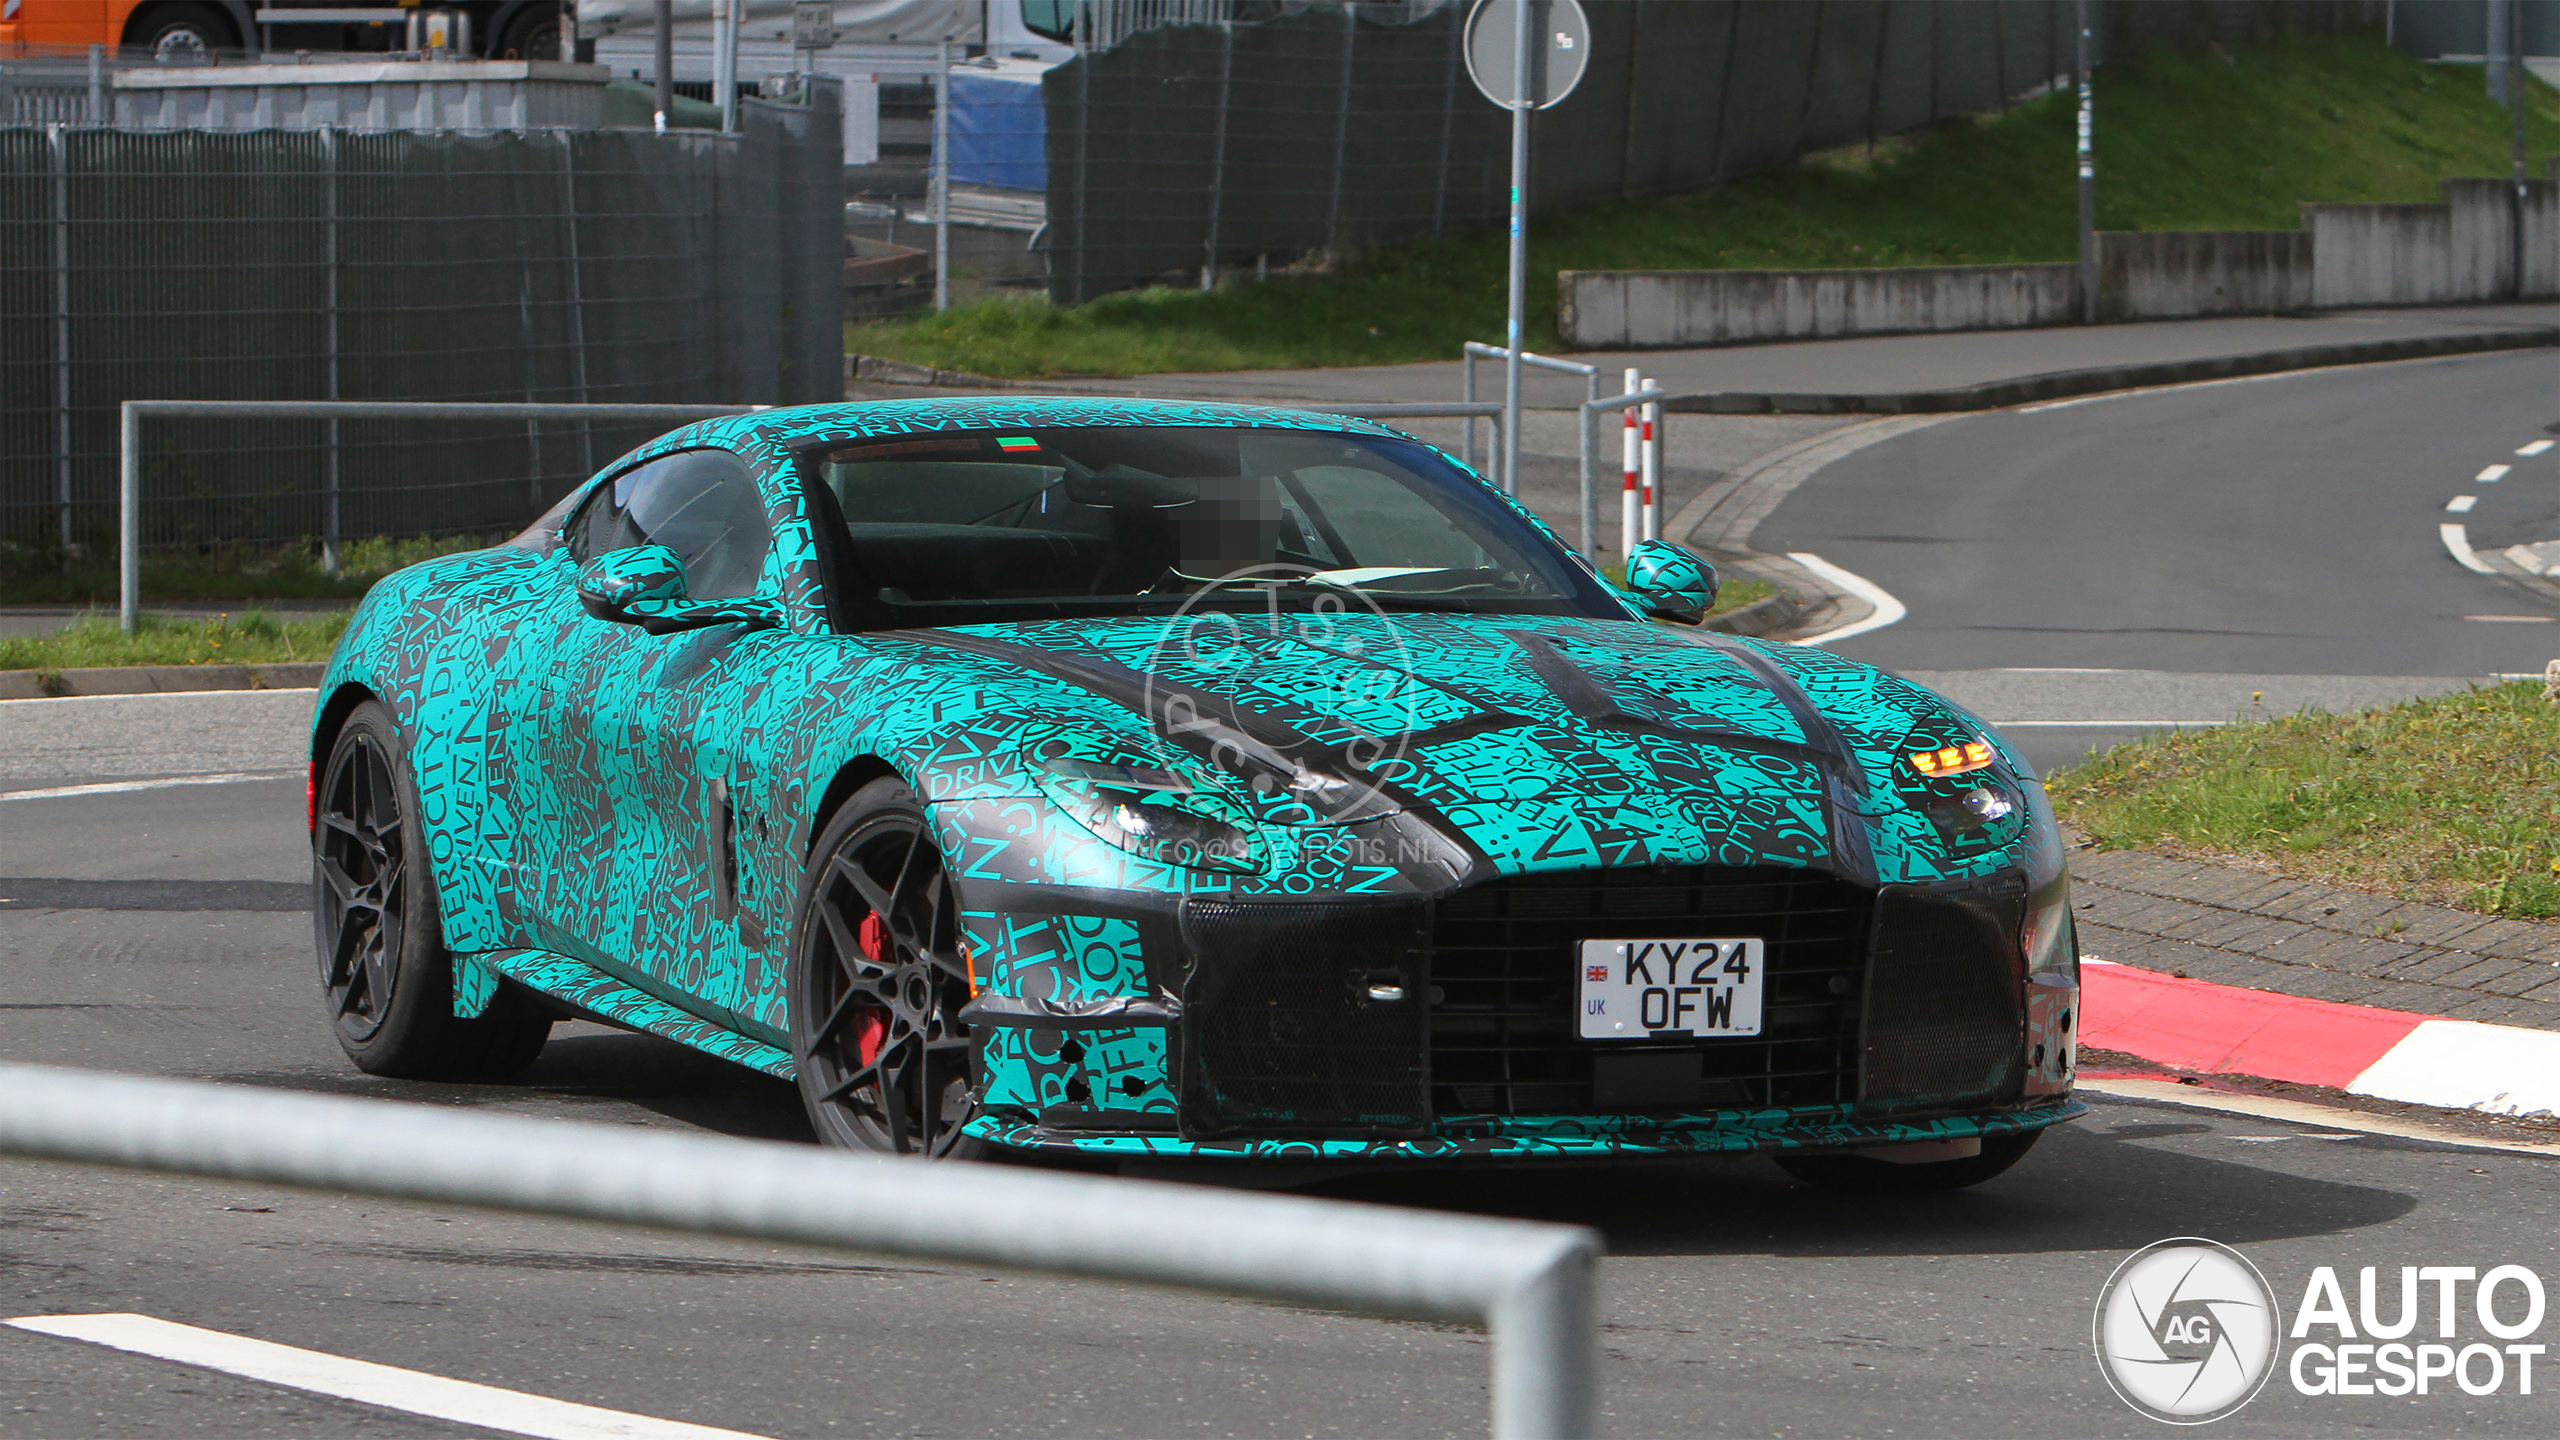 A new Aston Martin test car appears at the Nürburgring